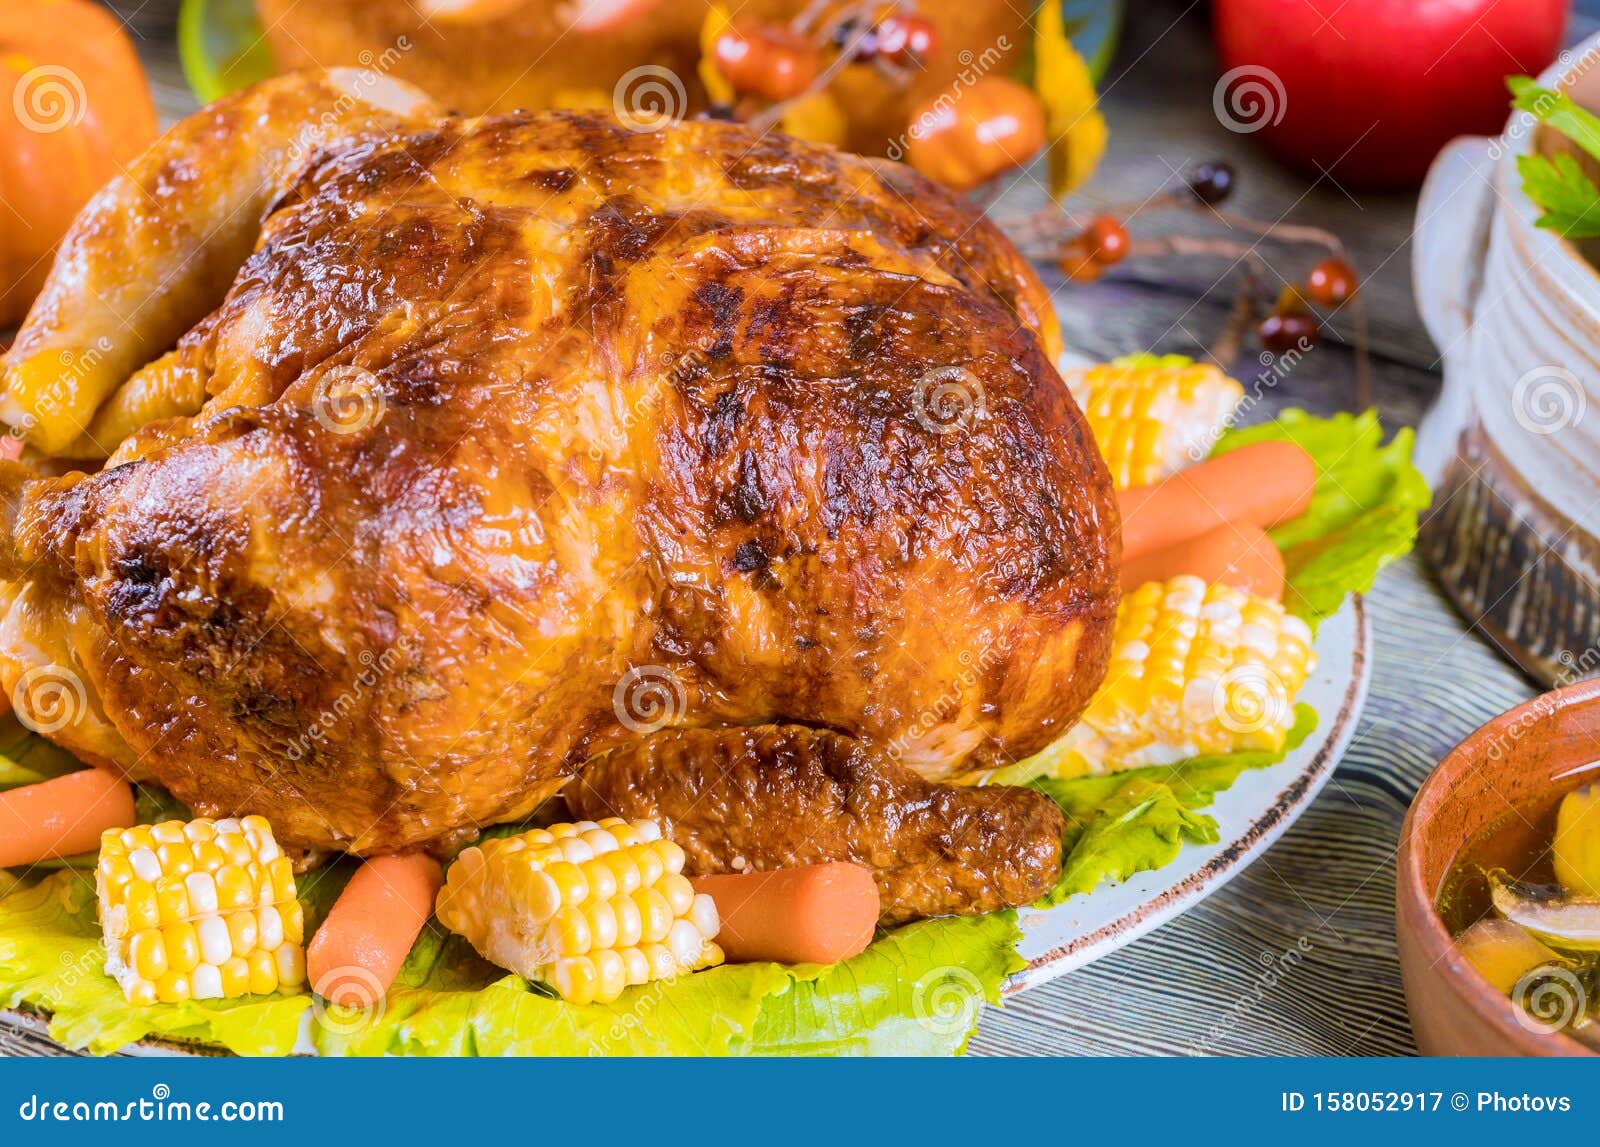 Thanksgiving Dinner with Roasted Turkey Garnished with Corn Stock Image ...